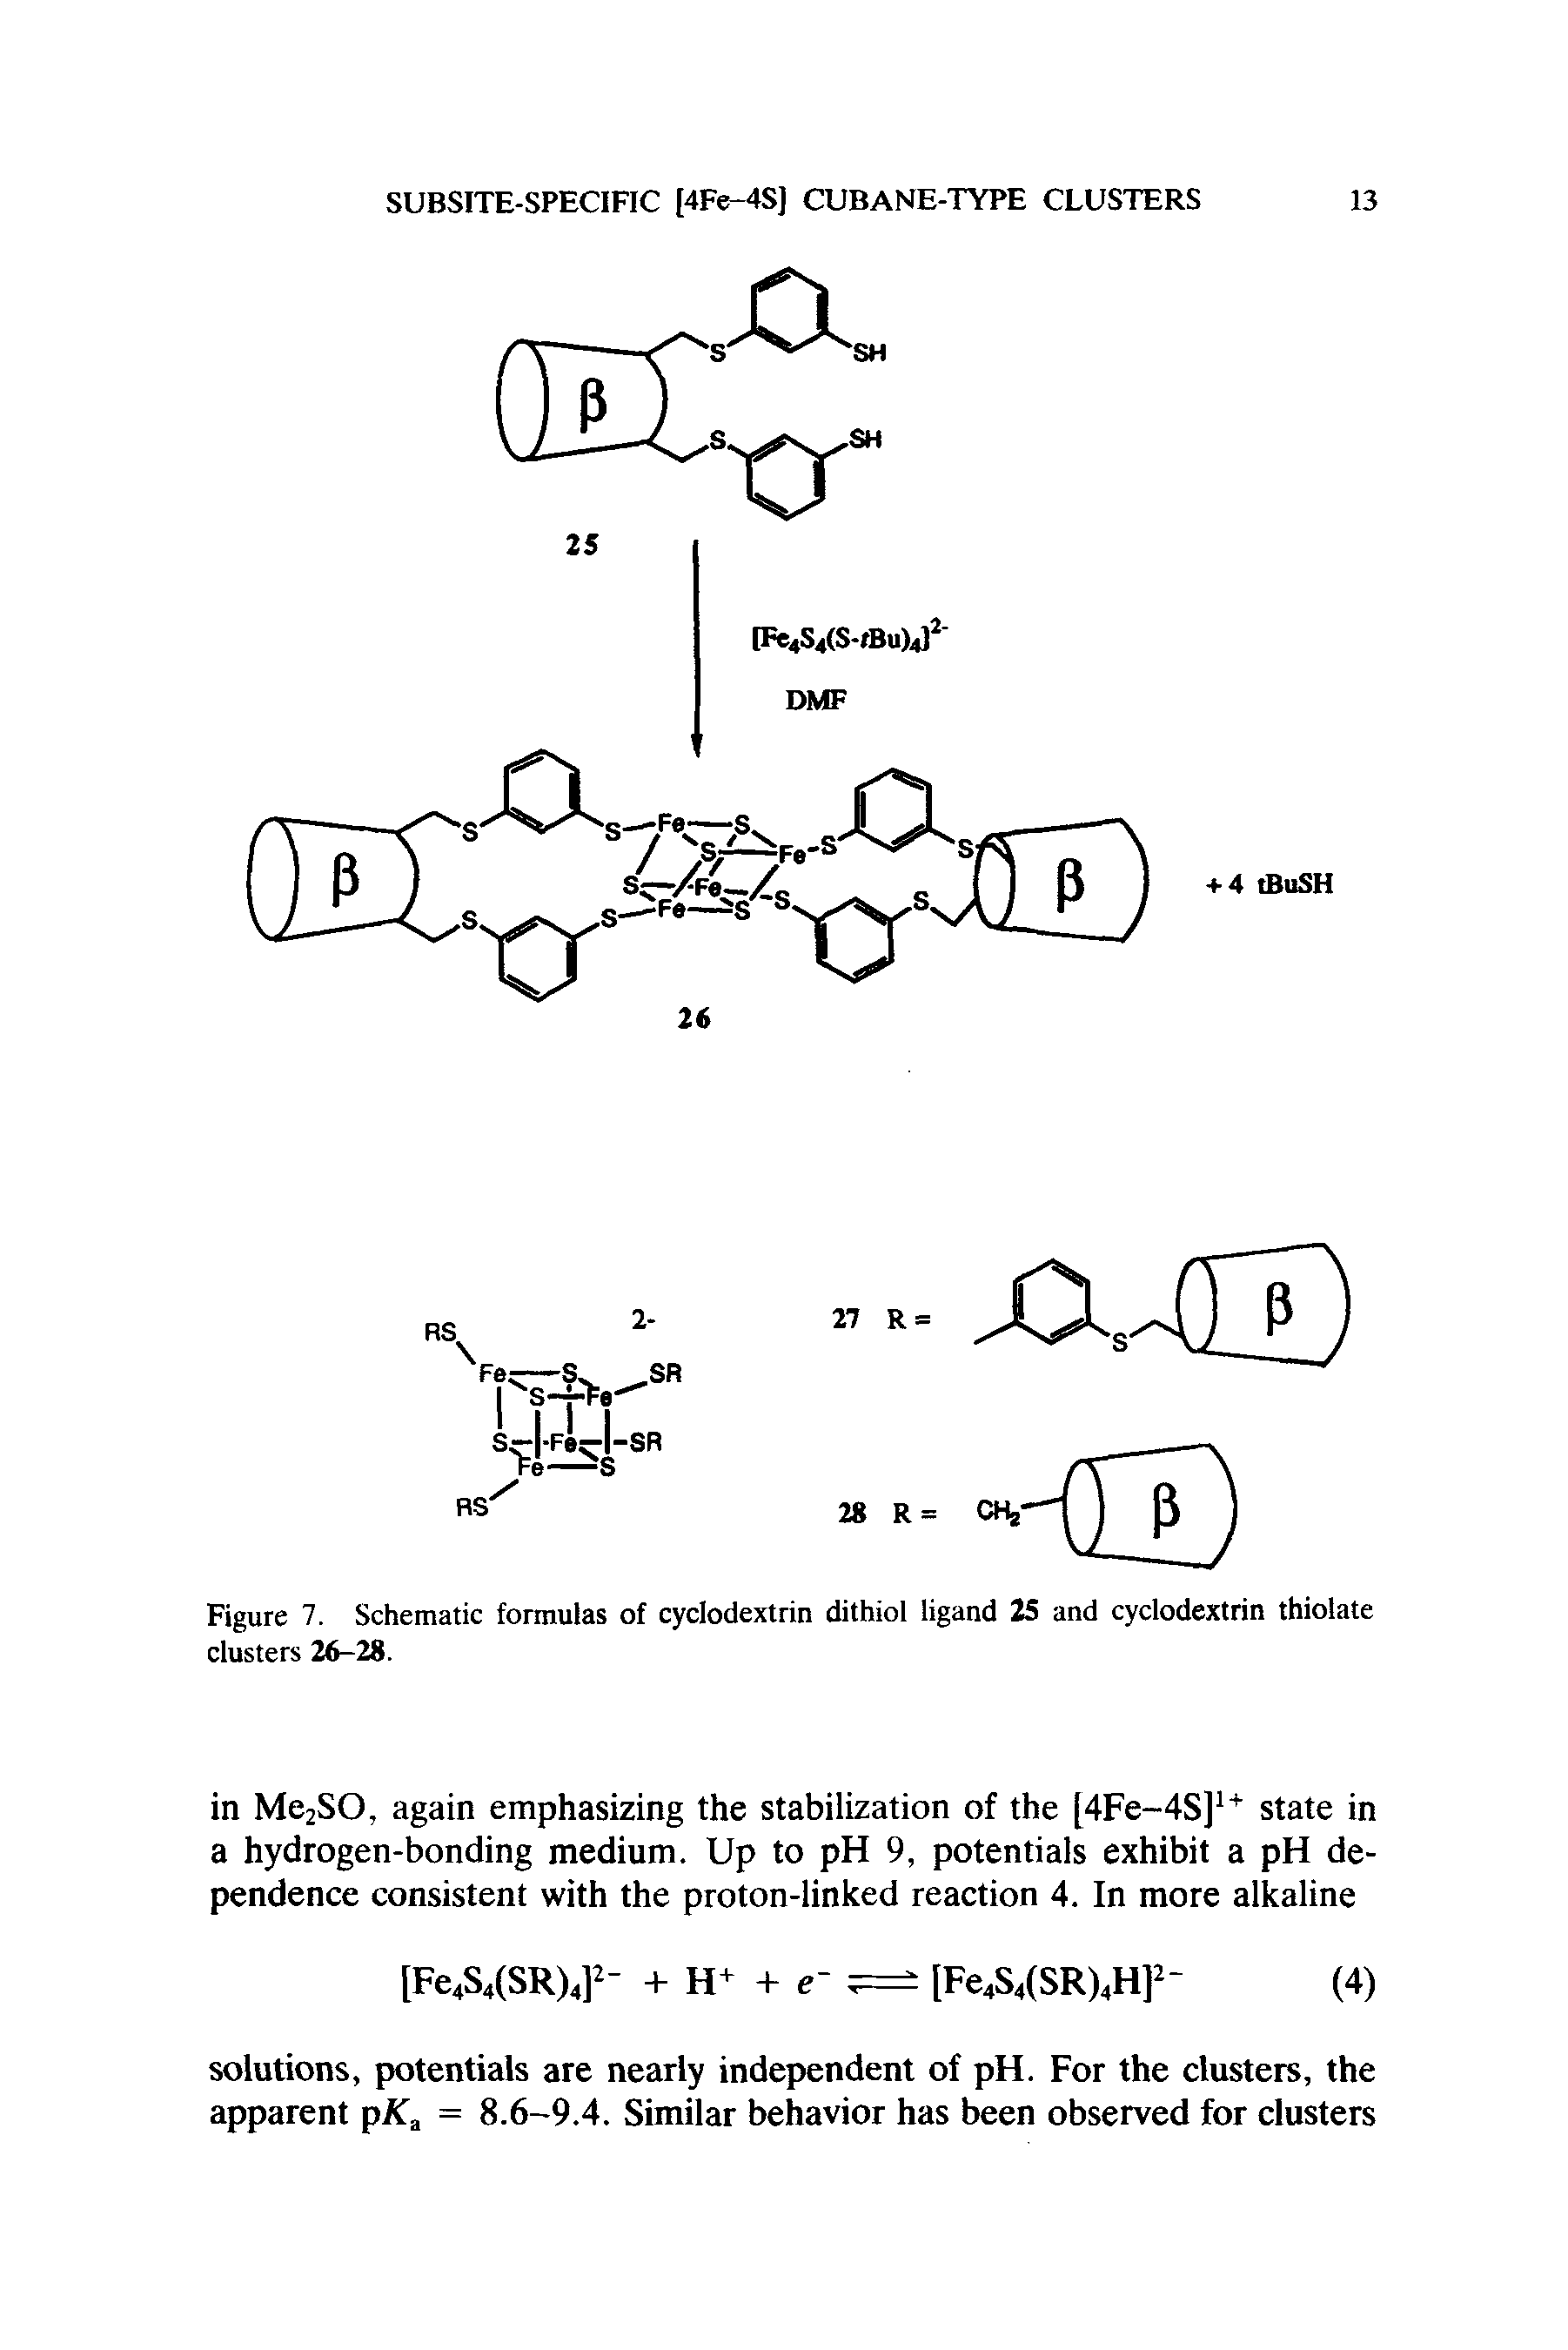 Figure 7. Schematic formulas of cyclodextrin dithiol ligand 25 and cyclodextrin thiolate clusters 26-28.